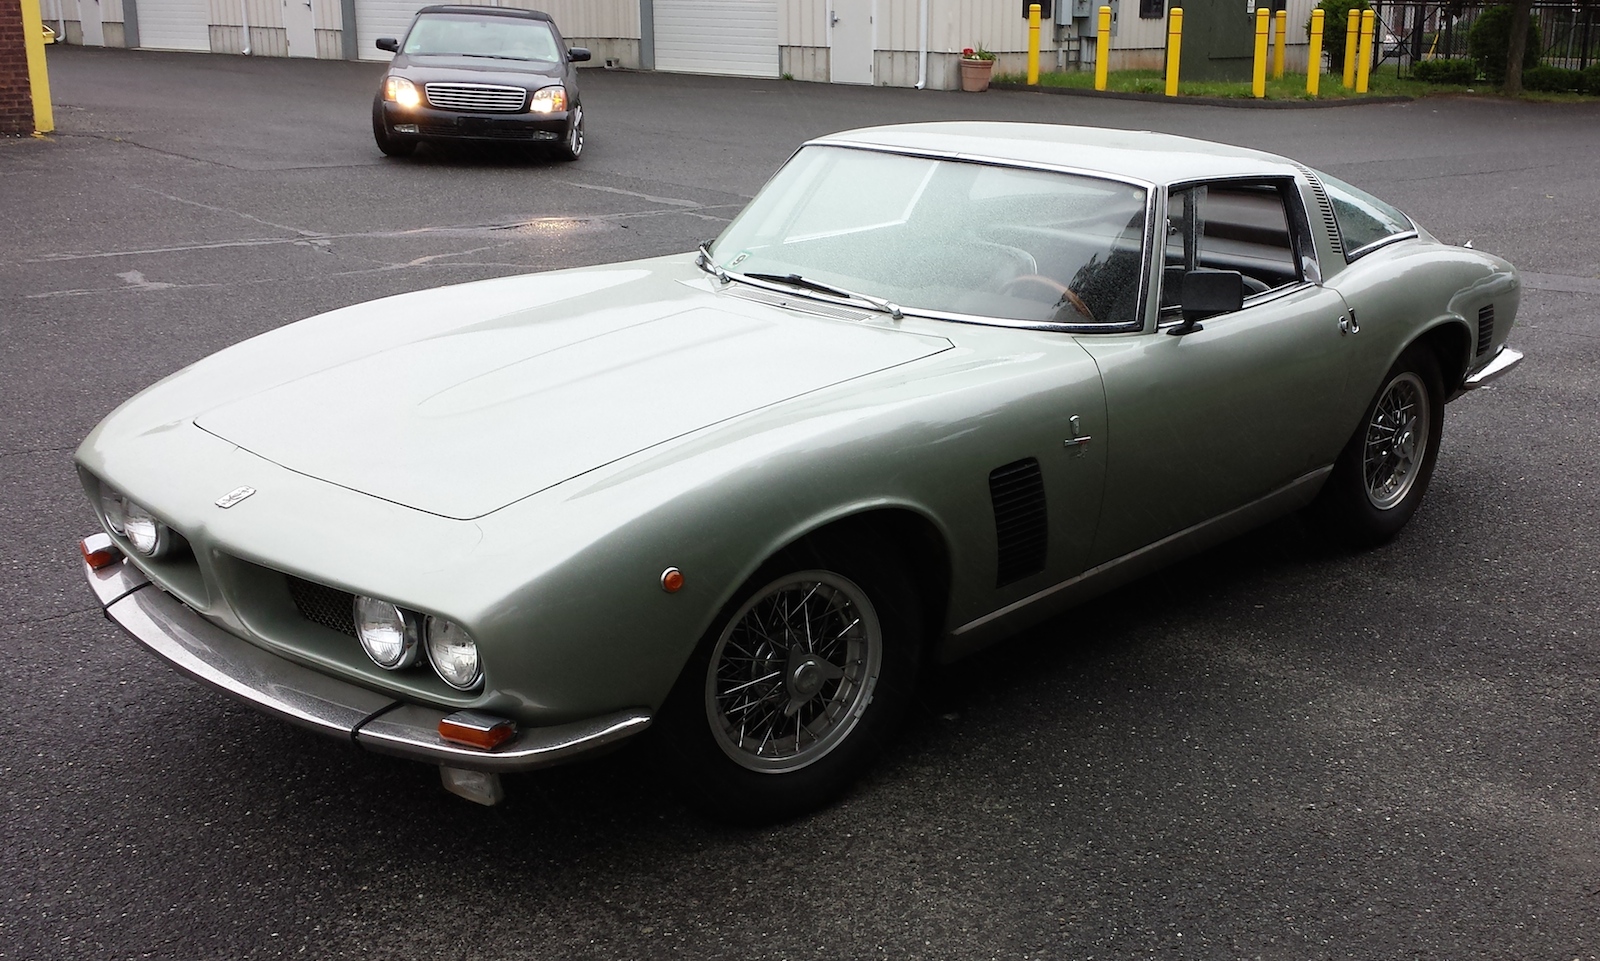 Iso Grifo GL 350 For Sale - Original Condition Series 1